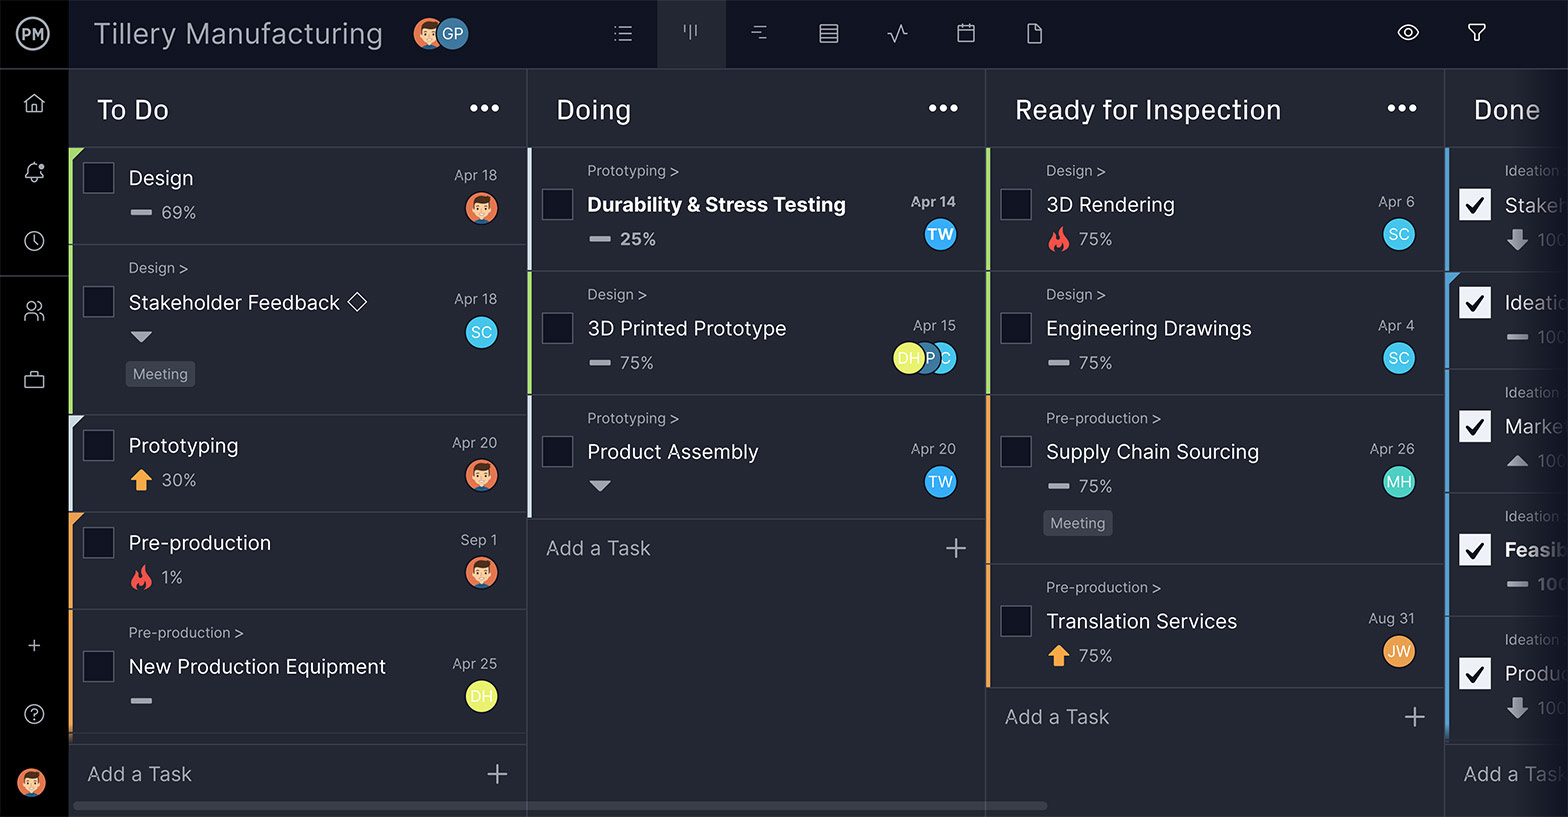 ProjectManager's kanban board is the perfect tool for agile project management